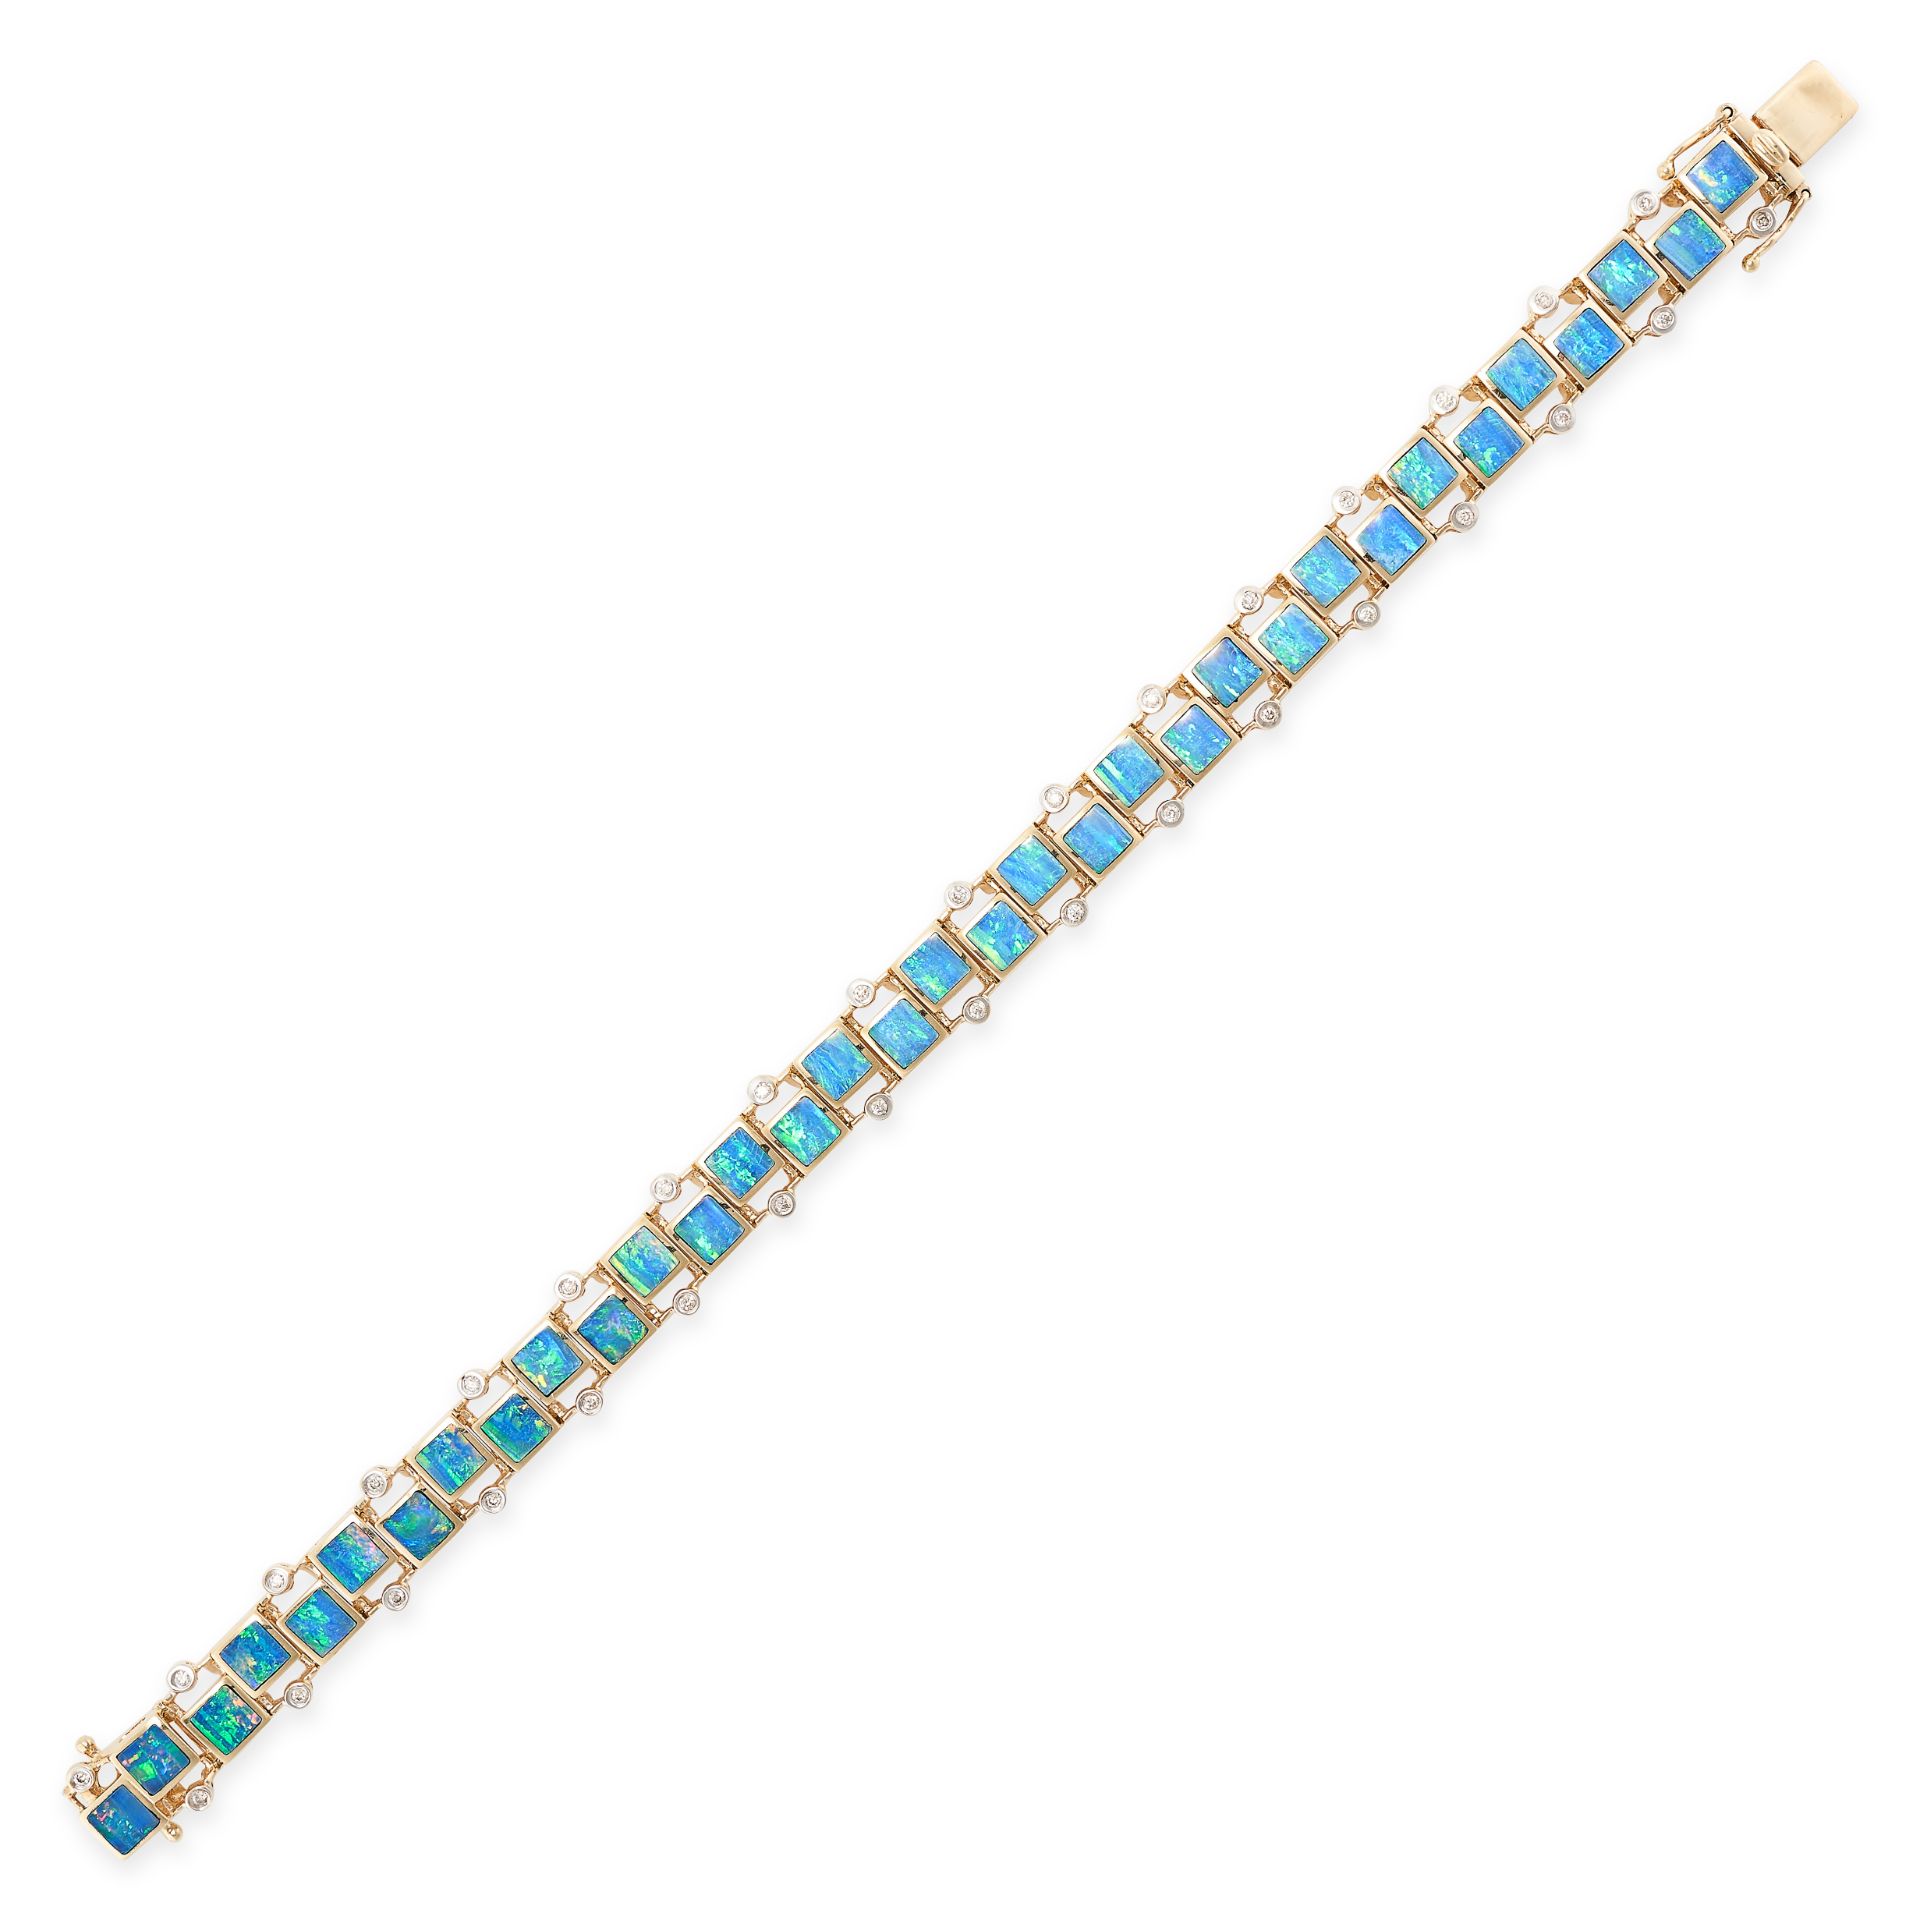 A BLACK OPAL AND DIAMOND BRACELET in 14ct yellow gold, set with a series of square opal slices ac...